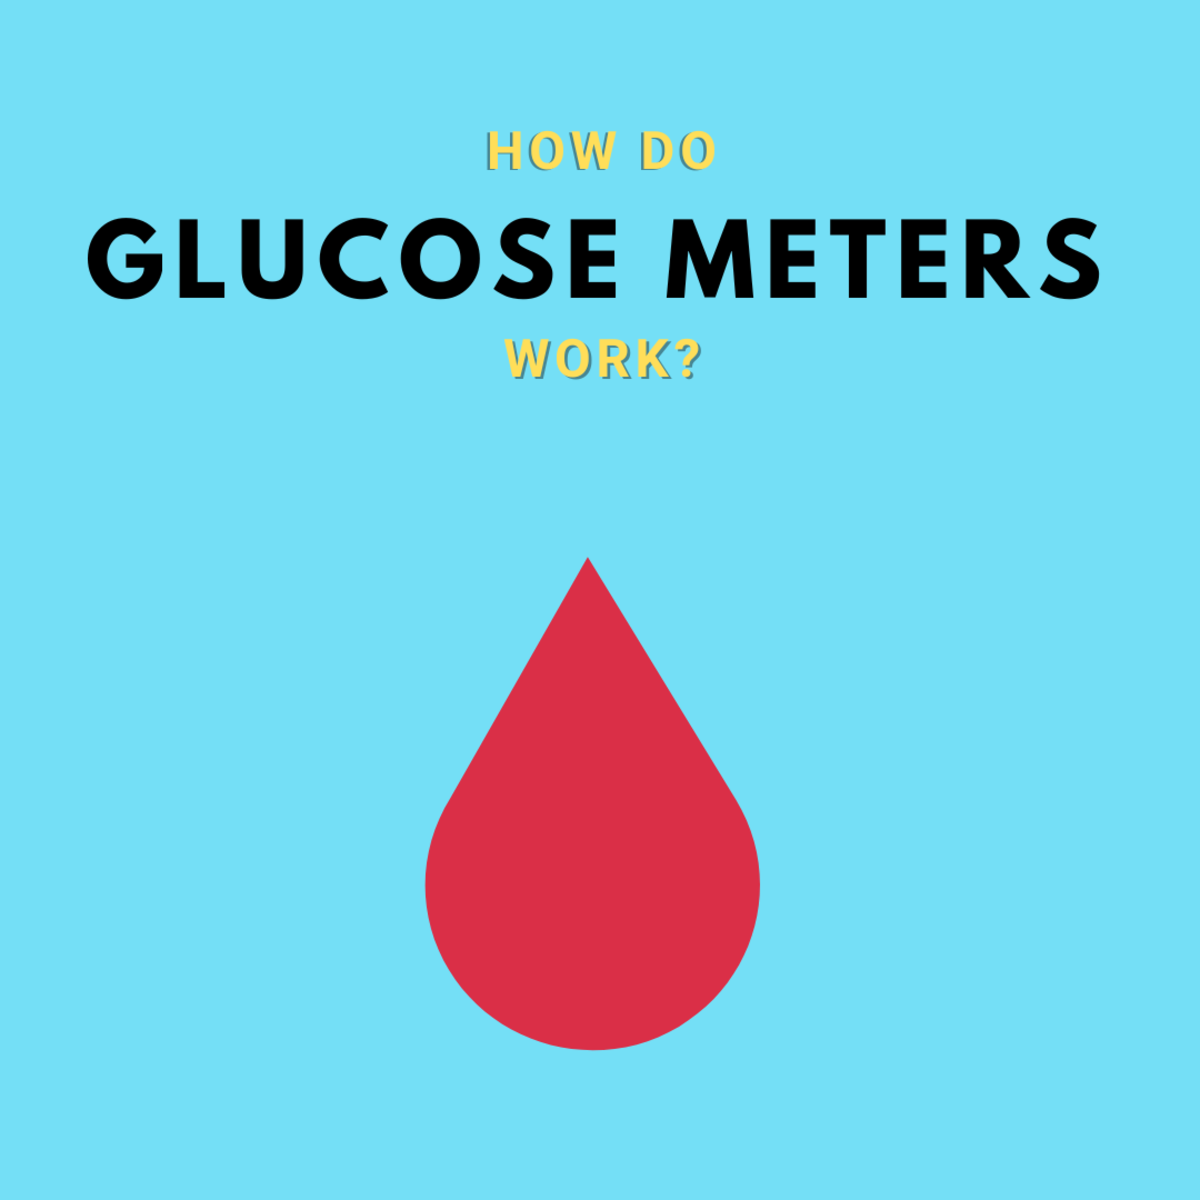 How Do Glucose Meters Work?